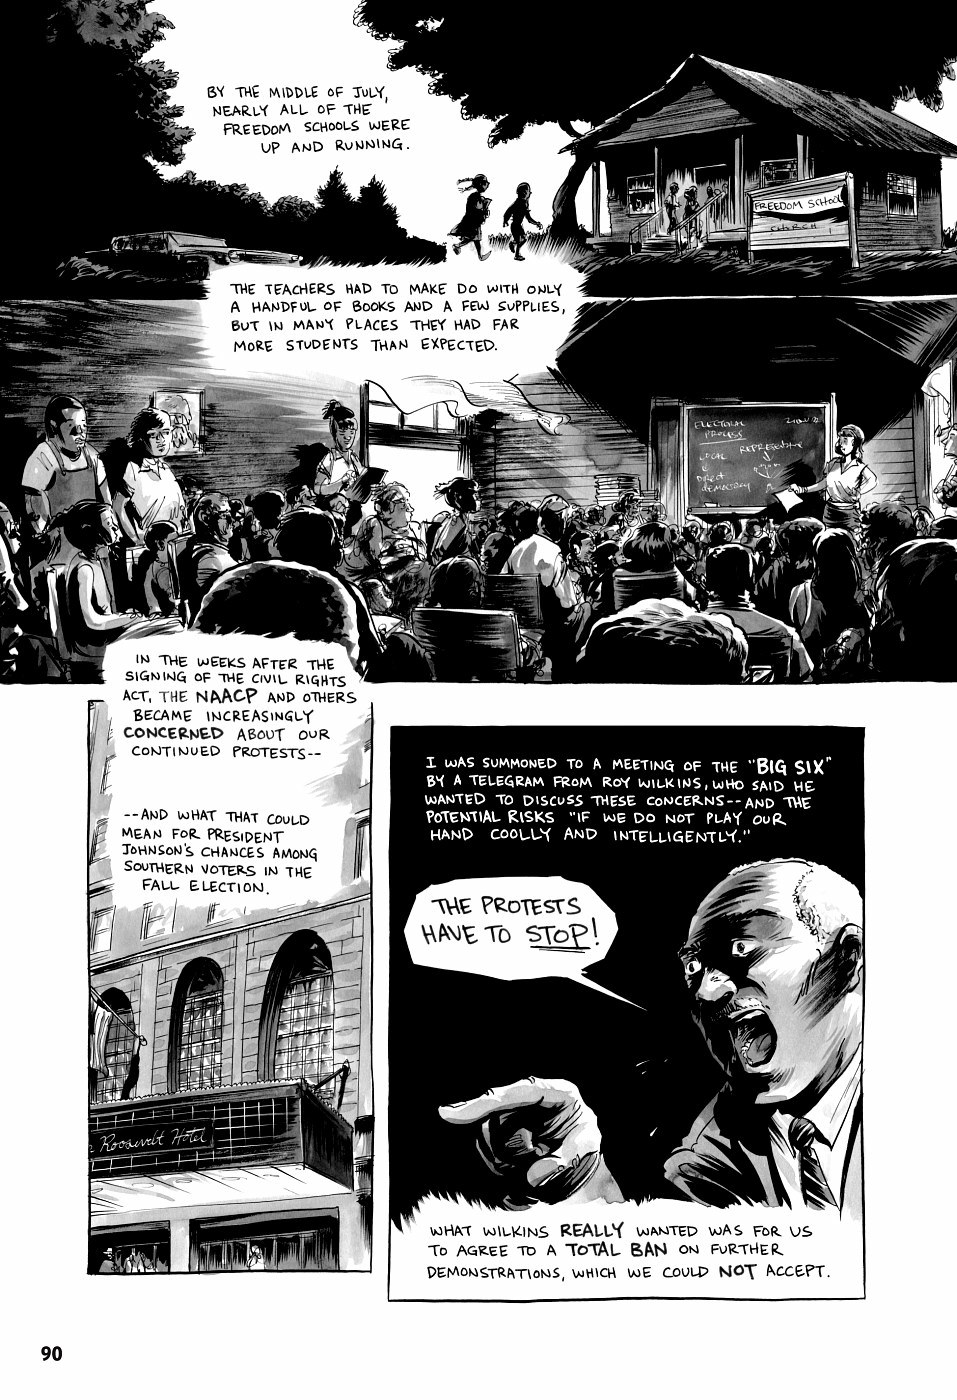 page 90 of march book three graphic novel